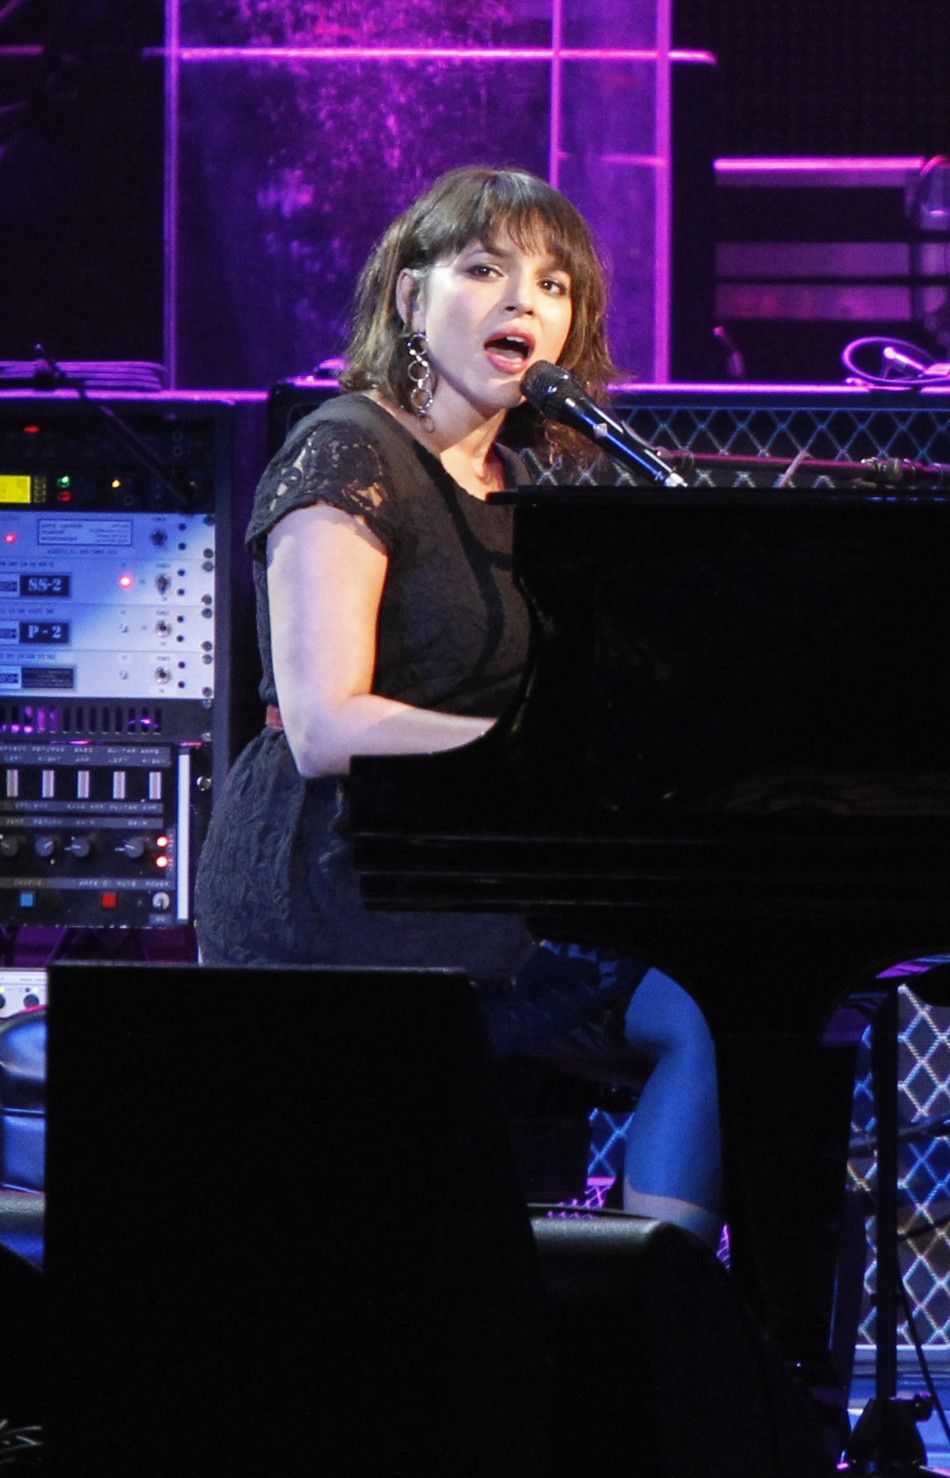 Singer Norah Jones performs quotOh Darlingquot during the 2012 MusiCares Person of the Year tribute honoring Paul McCartney in Los Angeles 